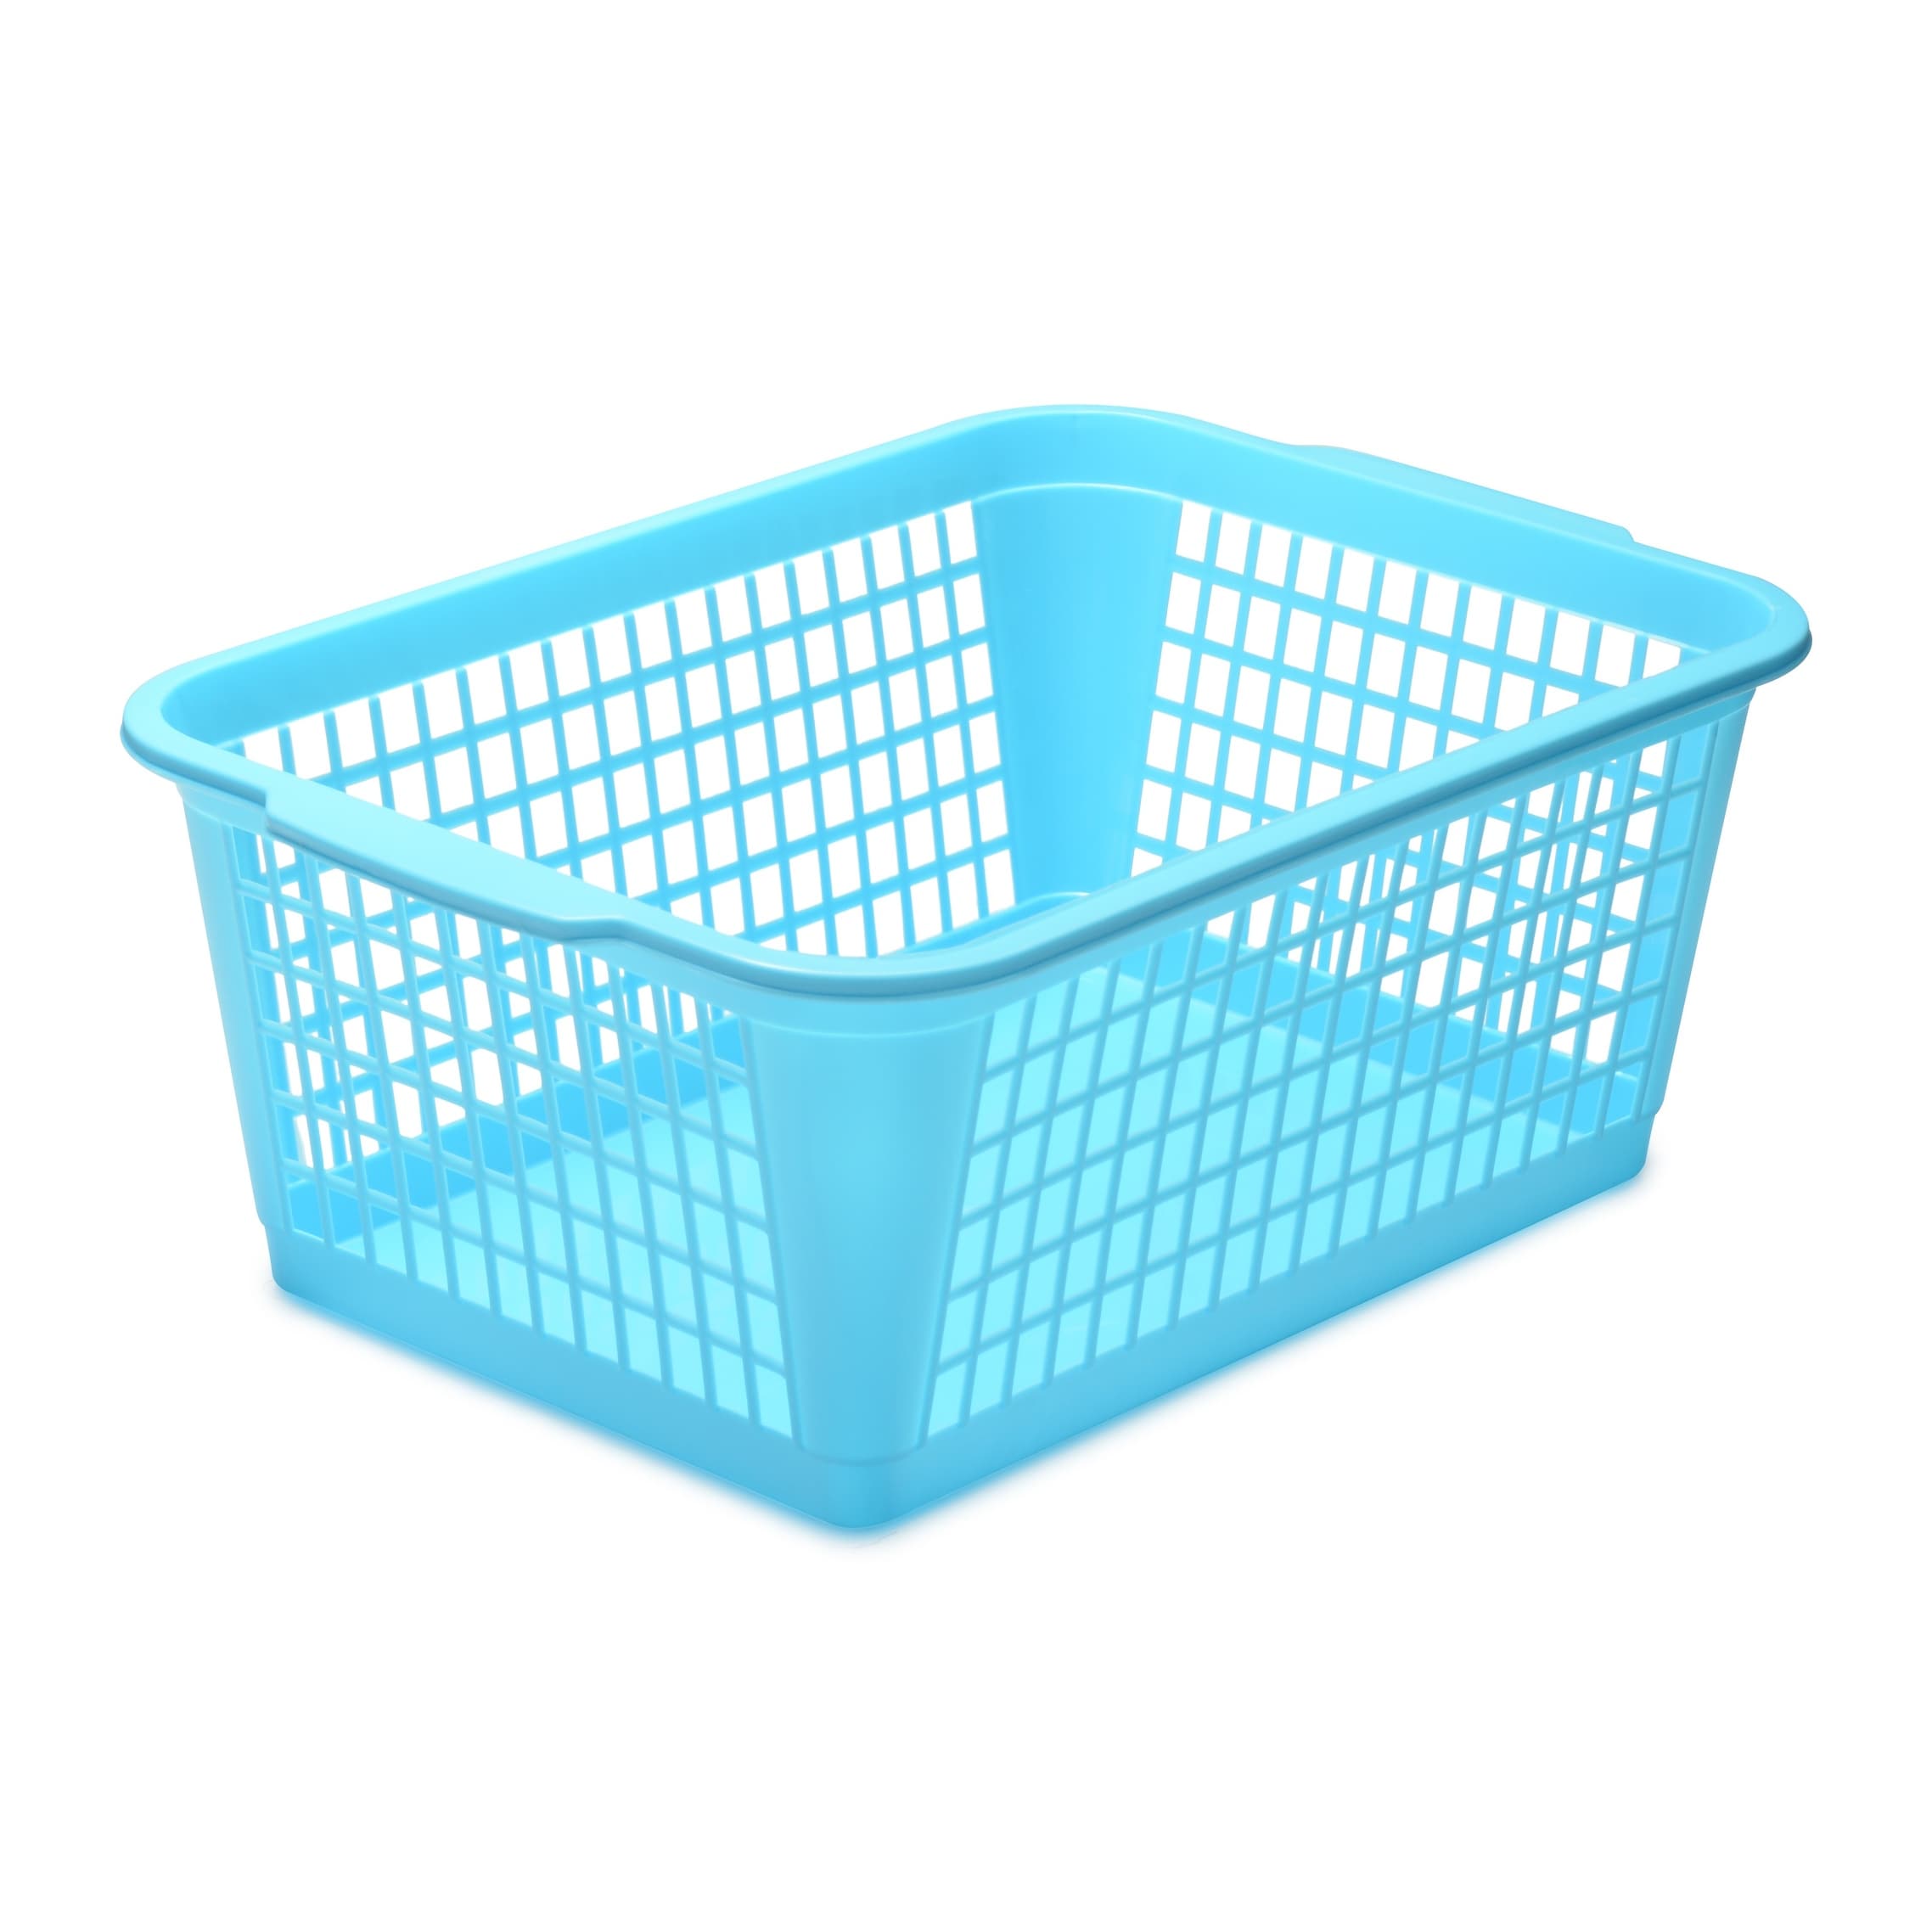 https://ak1.ostkcdn.com/images/products/is/images/direct/ad5f9d858d535fbf29ddce597b348f60f64c379d/YBM-Home-Large-Plastic-Storage-Basket-for-Organizing%2C-32-1184.jpg